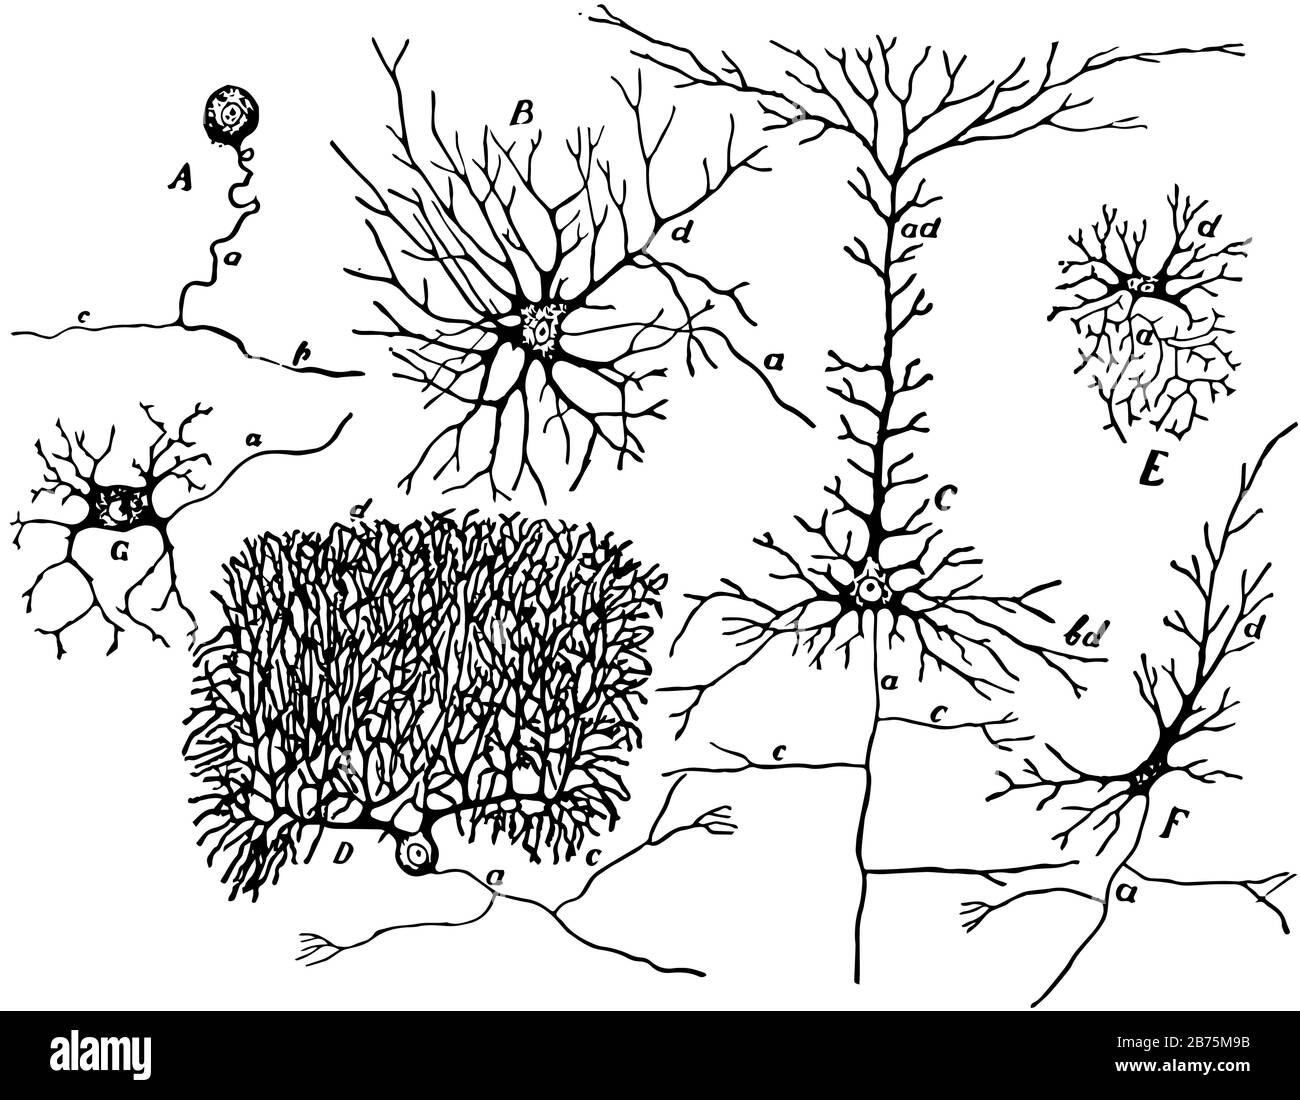 Purkinje cell from cerebellar cortex, vintage line drawing or engraving illustration. Stock Vector